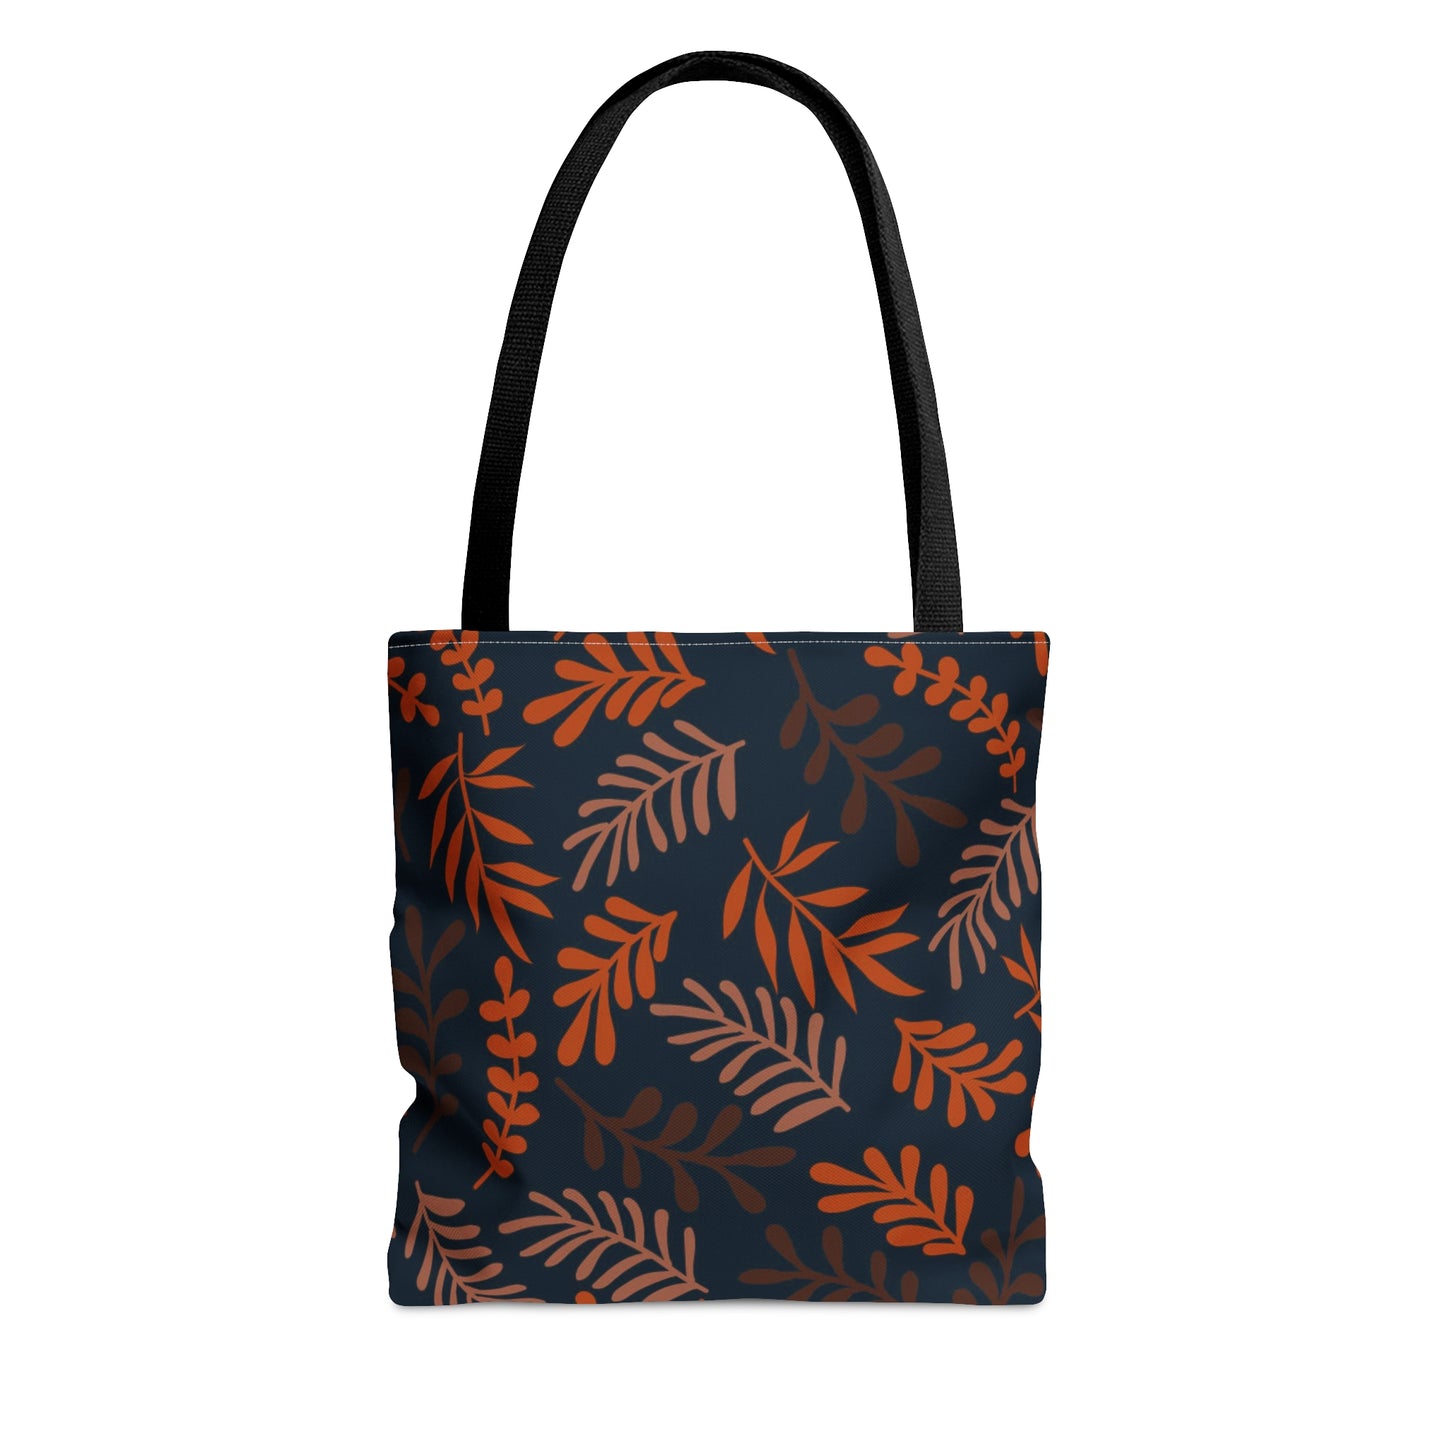 Shades of Autumn Floral Tote Bag